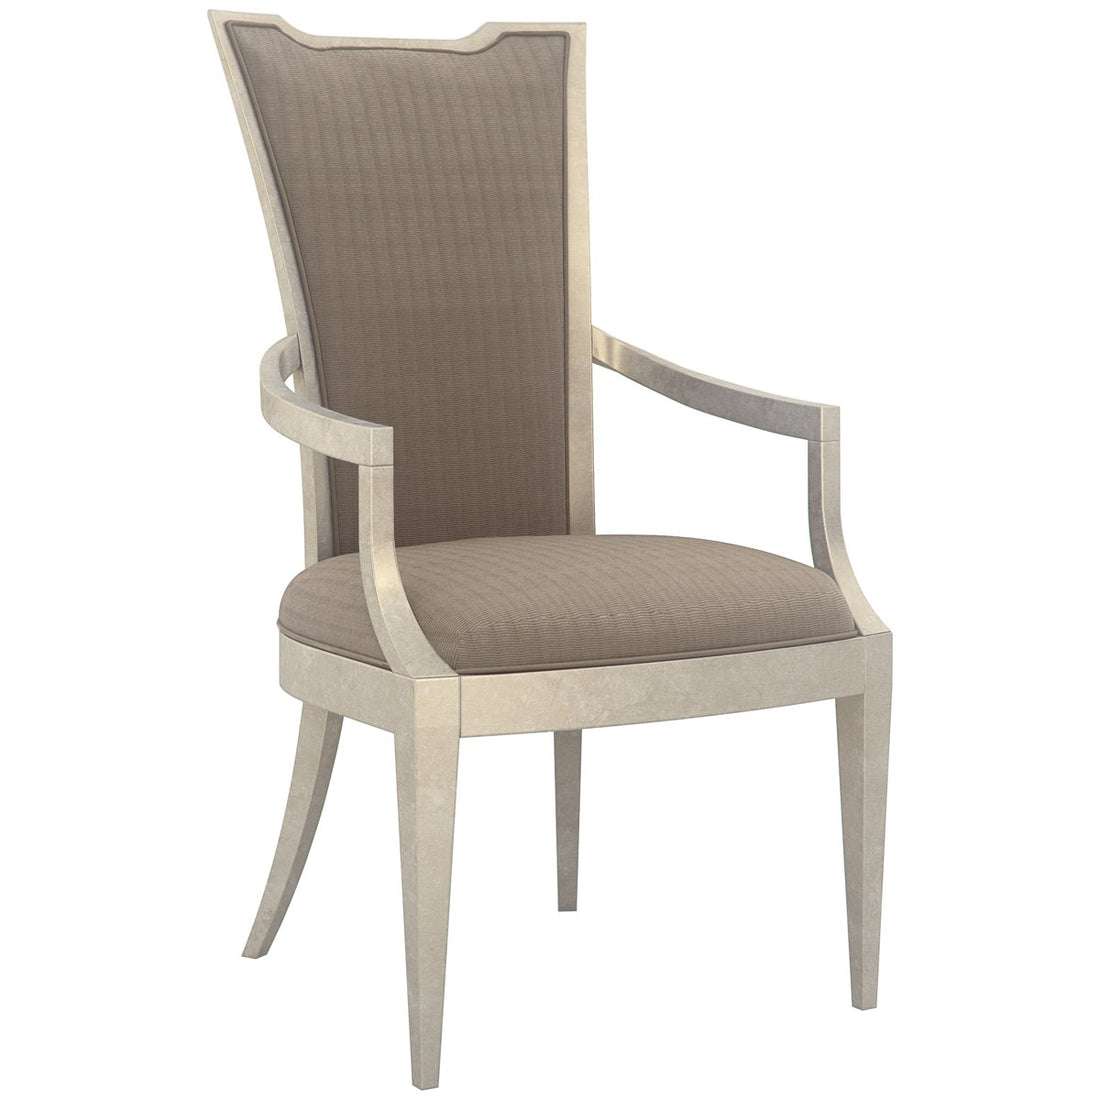 Caracole May I Join You? Arm Chair - Set of 2